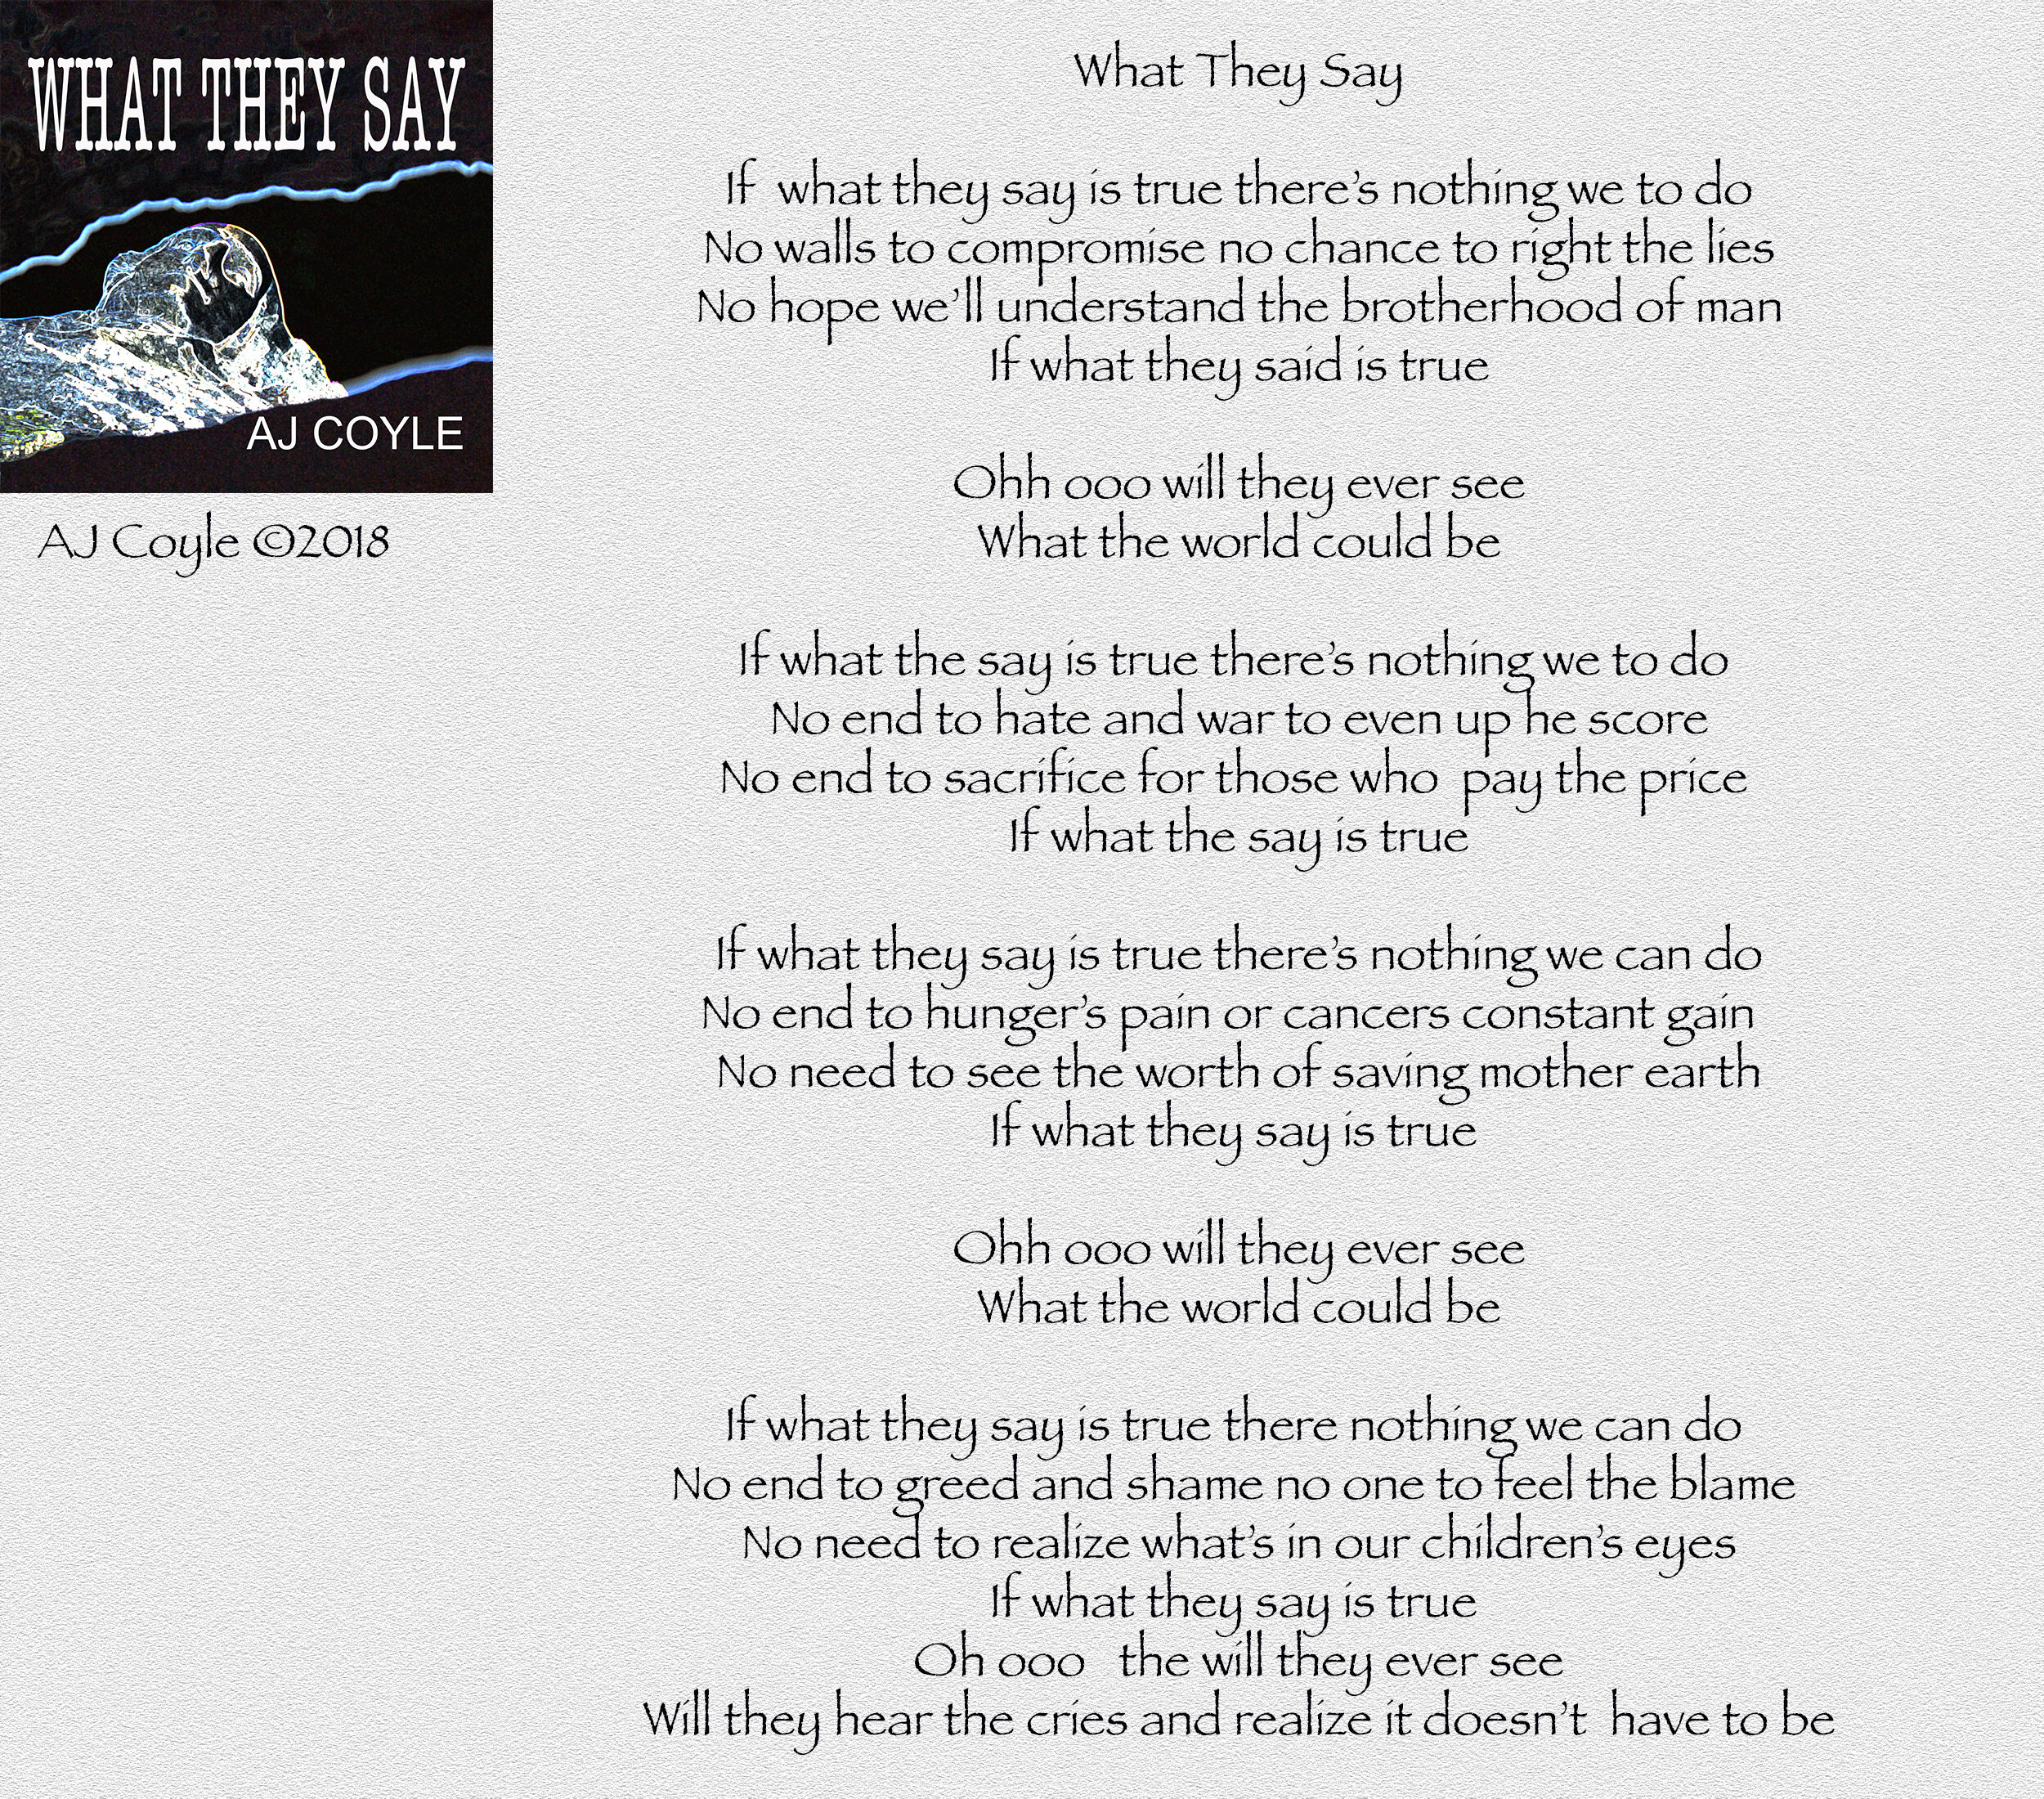 What They Say - AJ Coyle